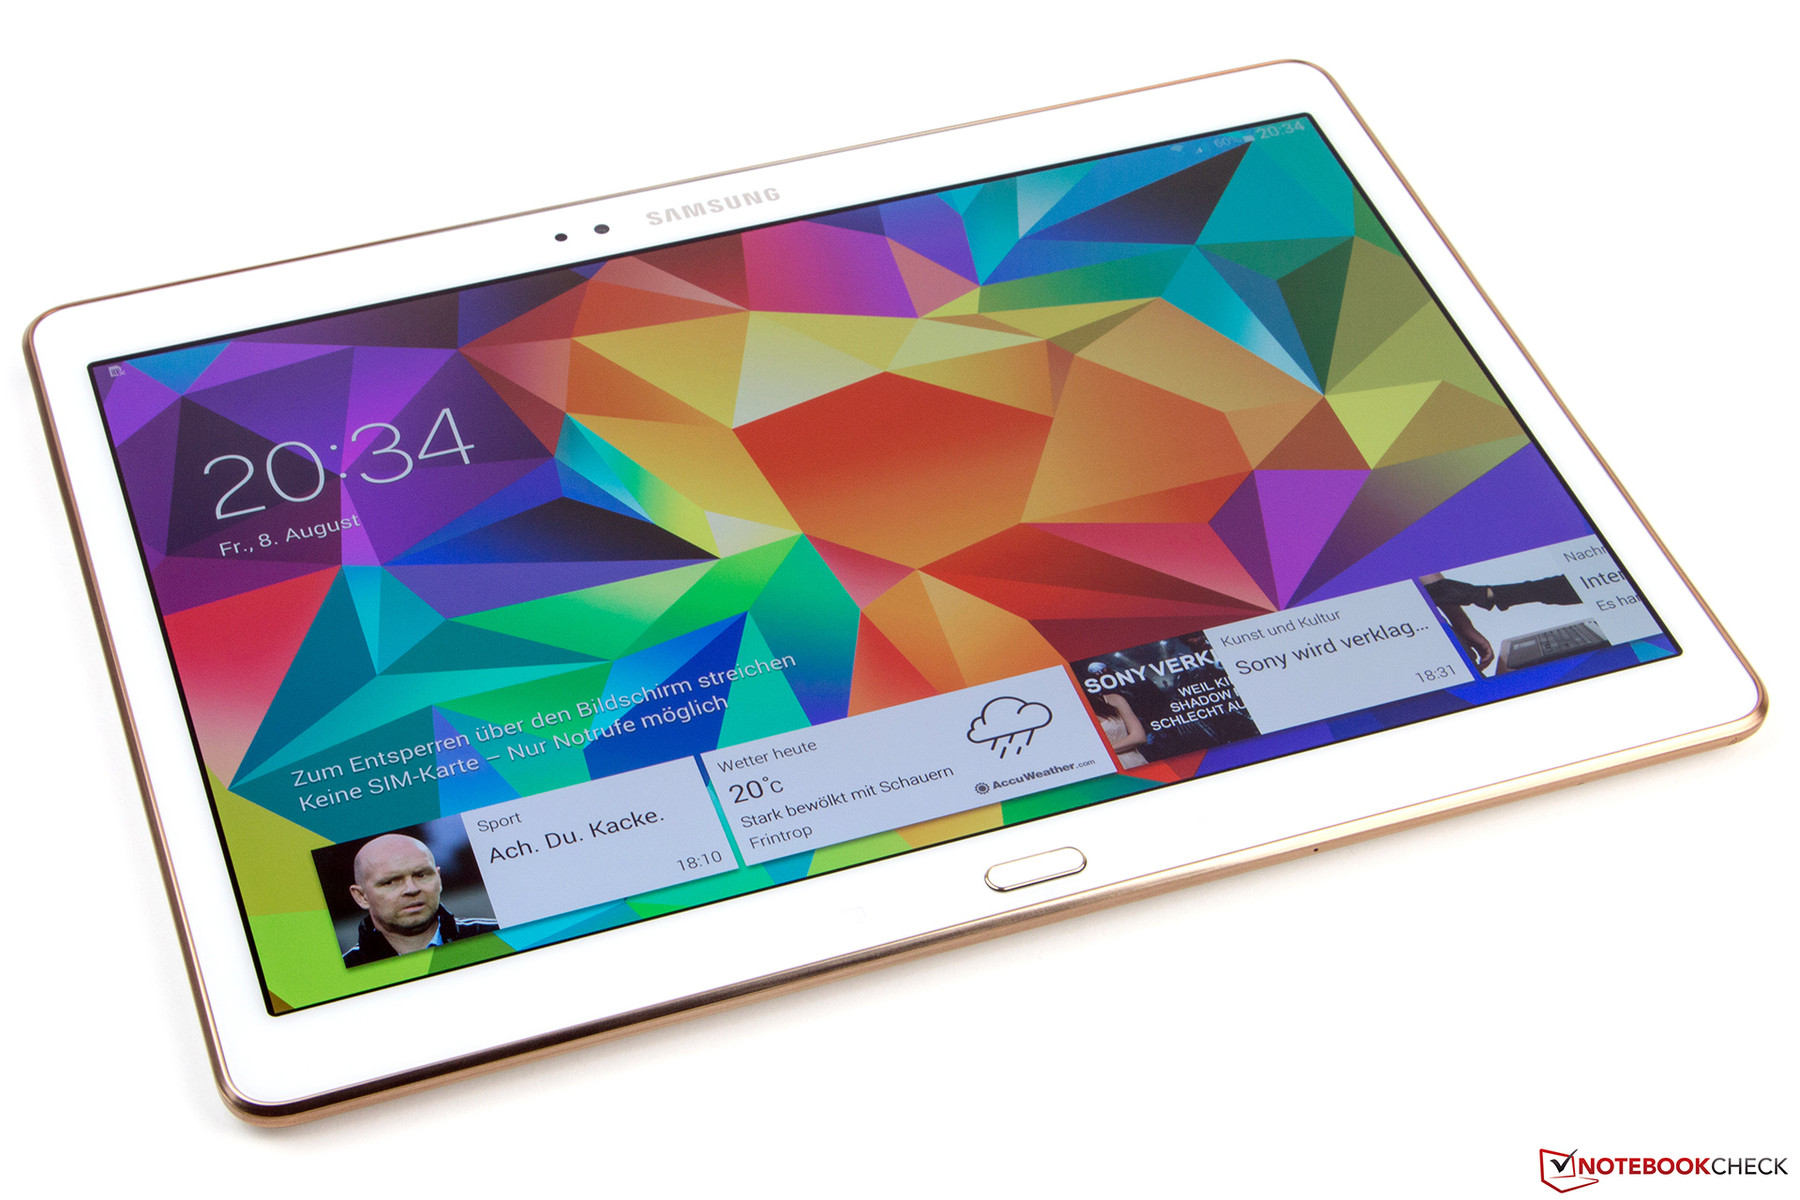 Samsung Galaxy Tab S 10.5 Tablet Review - NotebookCheck.net Reviews